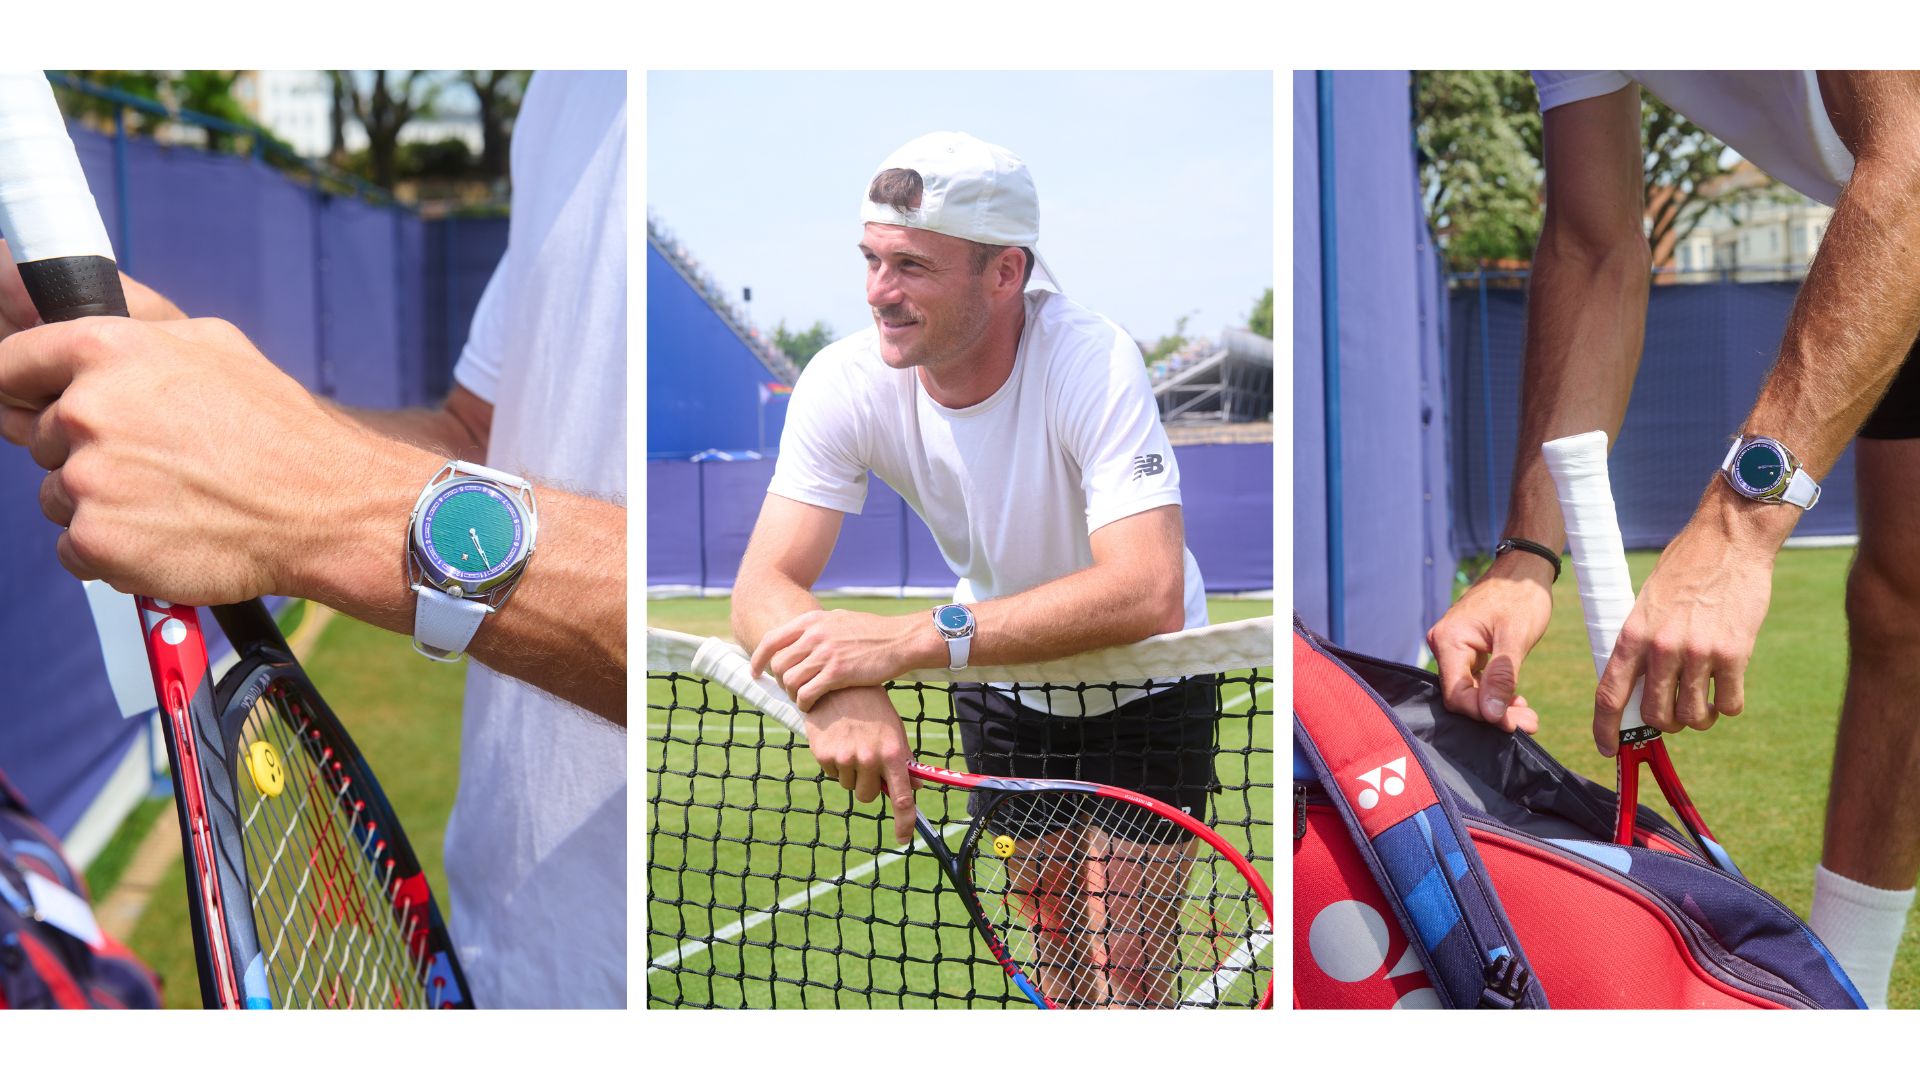 De Bethune is delighted to be supporting talented tennis player Tommy Paul on the first day of Wimbledon!